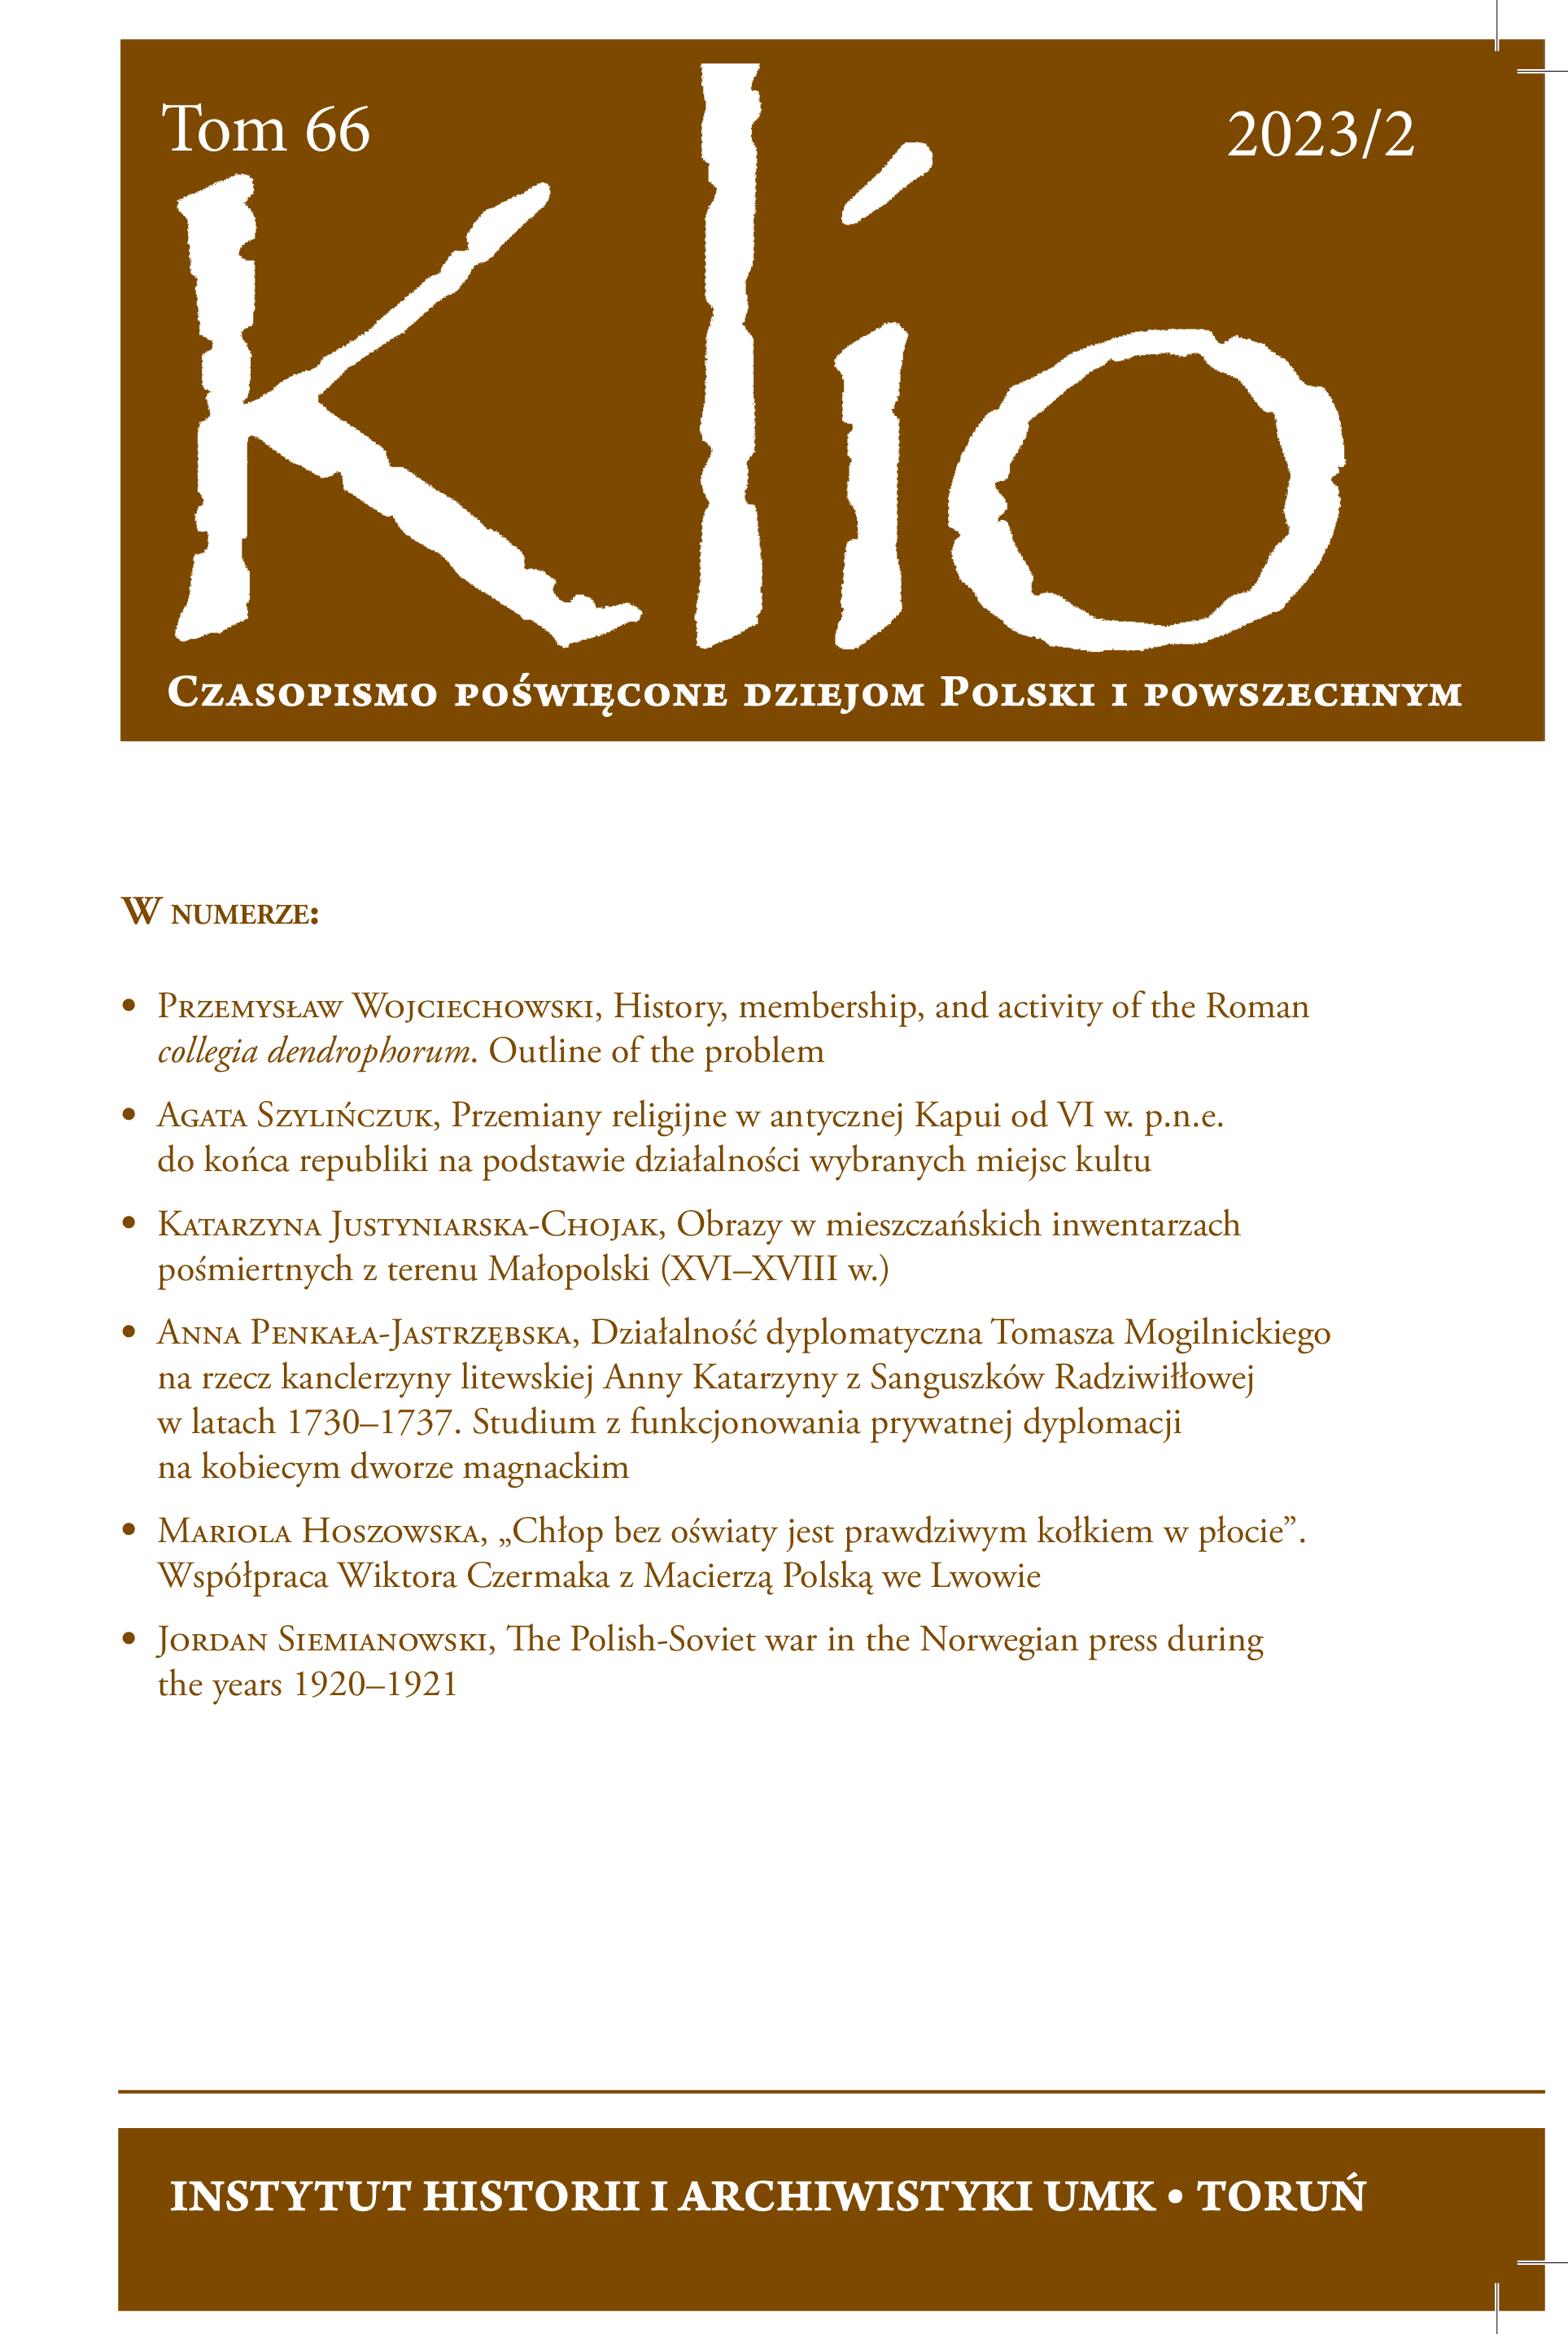 The diplomatic activity of Tomasz Mogilnicki
on behalf of the Lithuanian Chancellor Anna Katarzyna Radziwiłł née Sanguszko in the years 1730–1737
A study on the functioning of private diplomacy at the women’s magnate court Cover Image